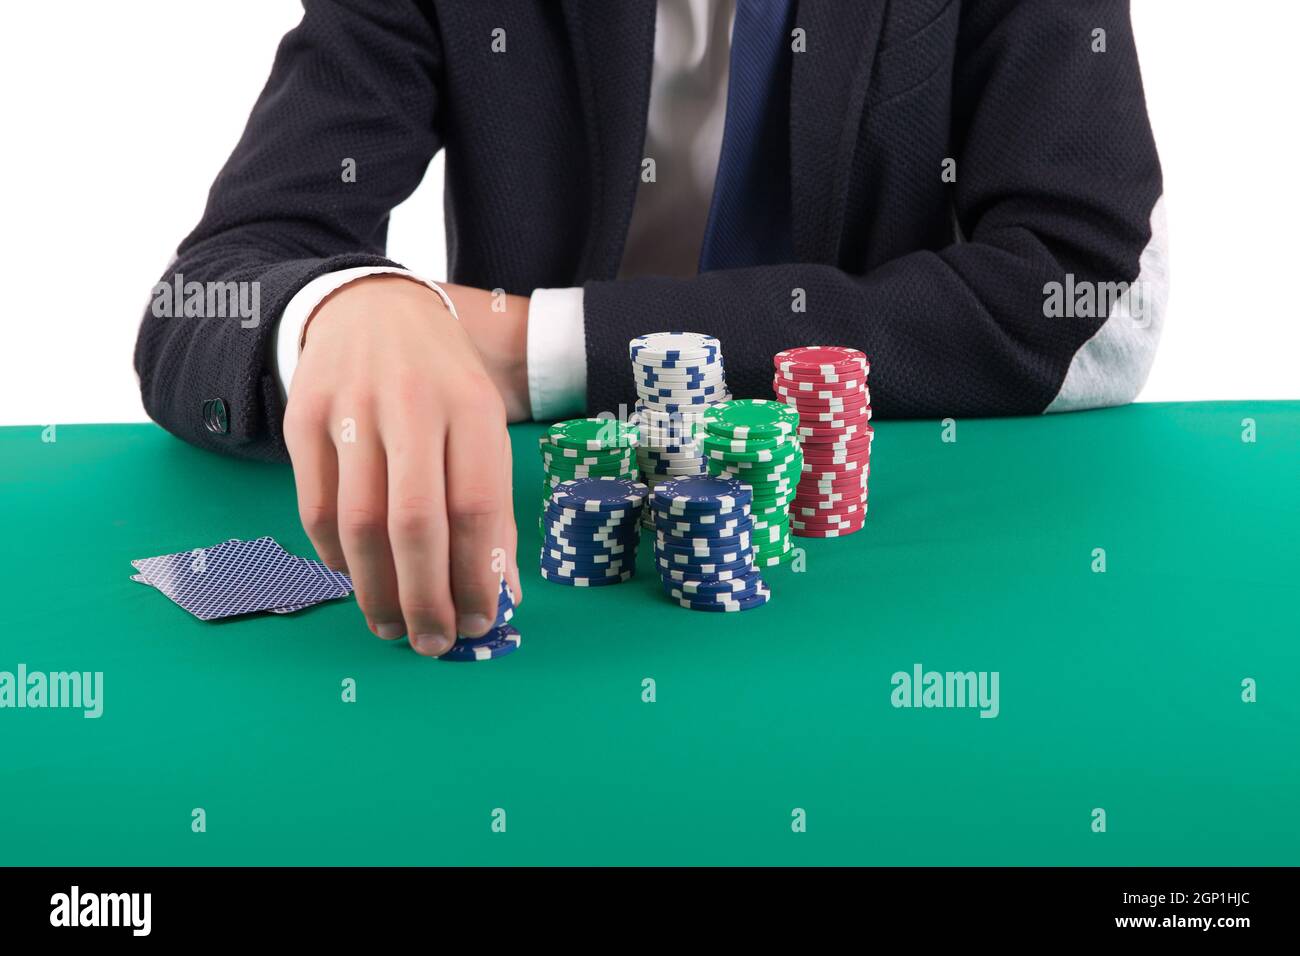 Young handsome man playing texas hold'em poker Stock Photo